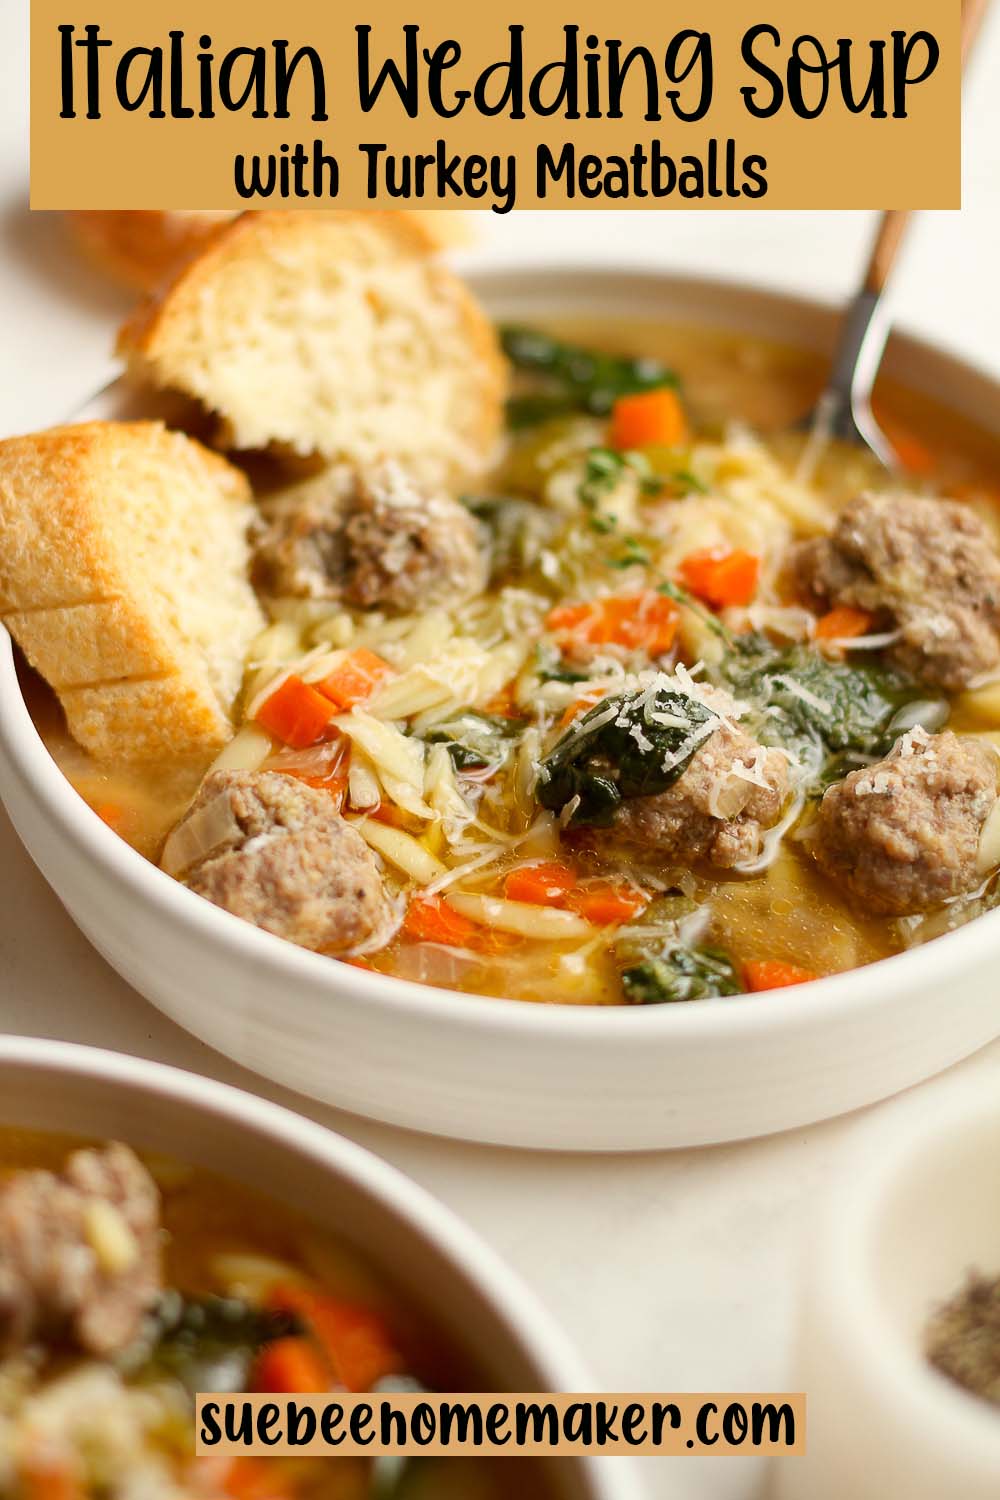 Side view of a bowl of Italian Wedding Soup with turkey meatballs.